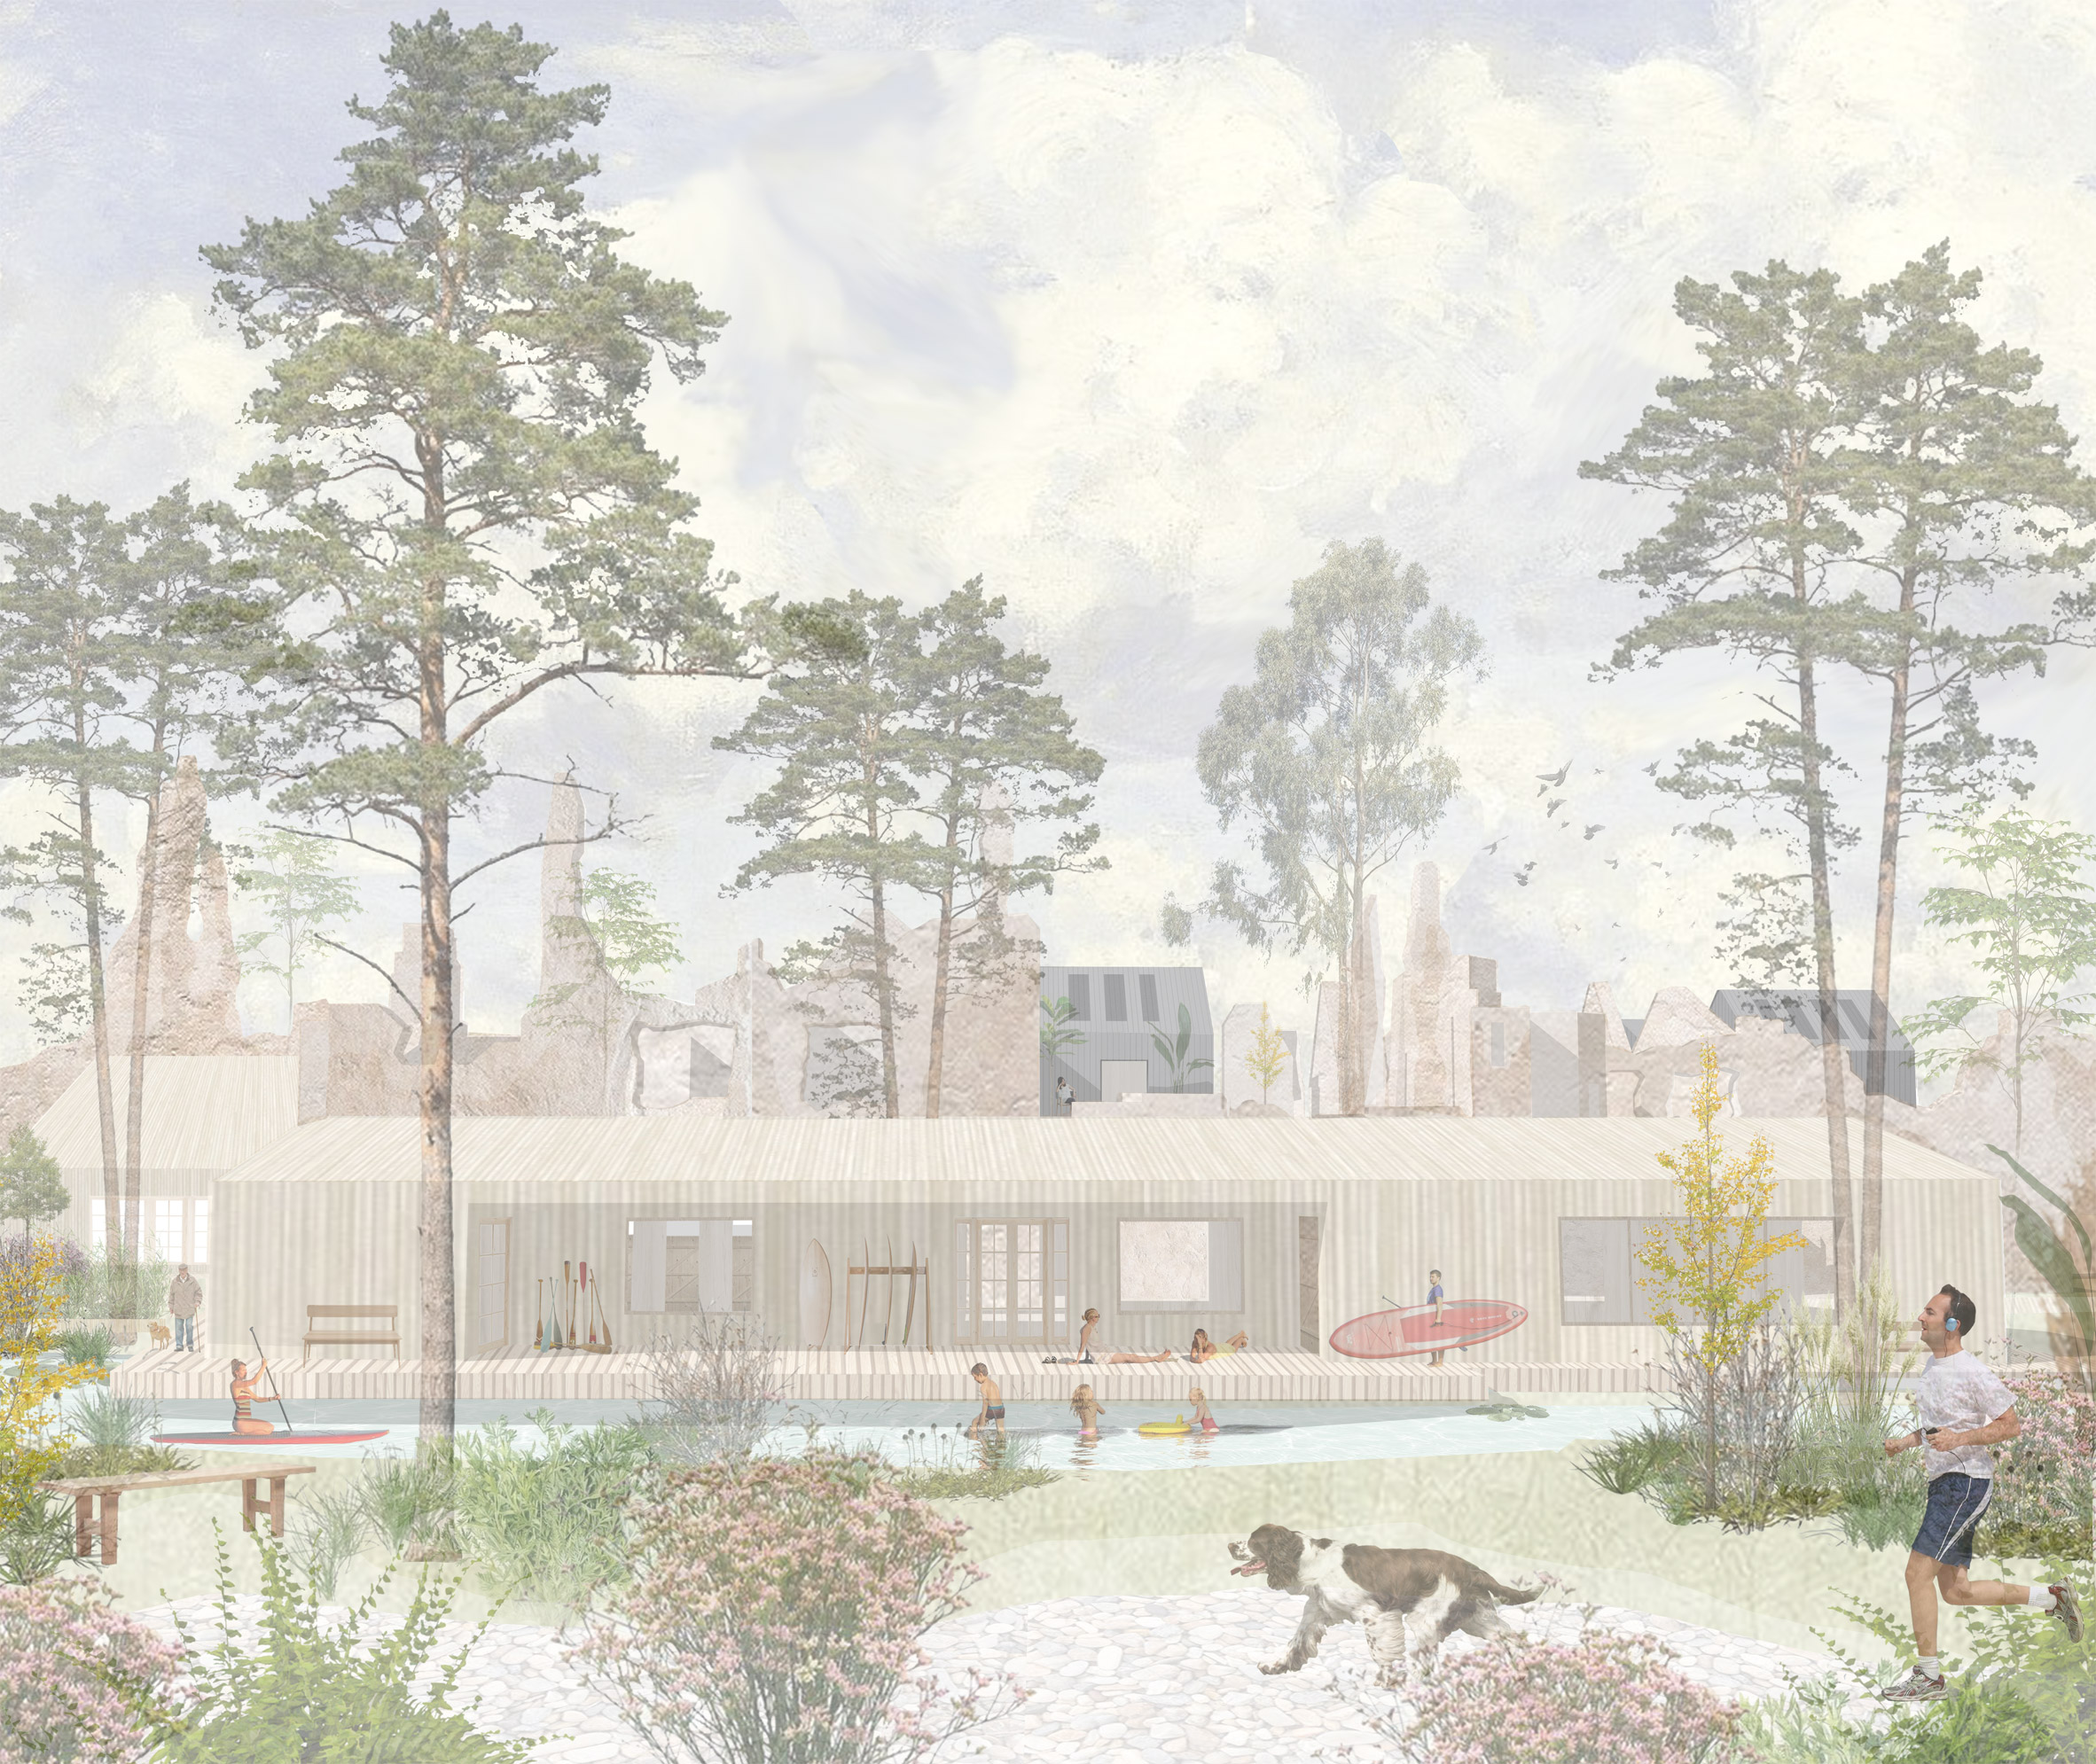 Pastel-toned render of a timber structure with a lake and planted surroundings